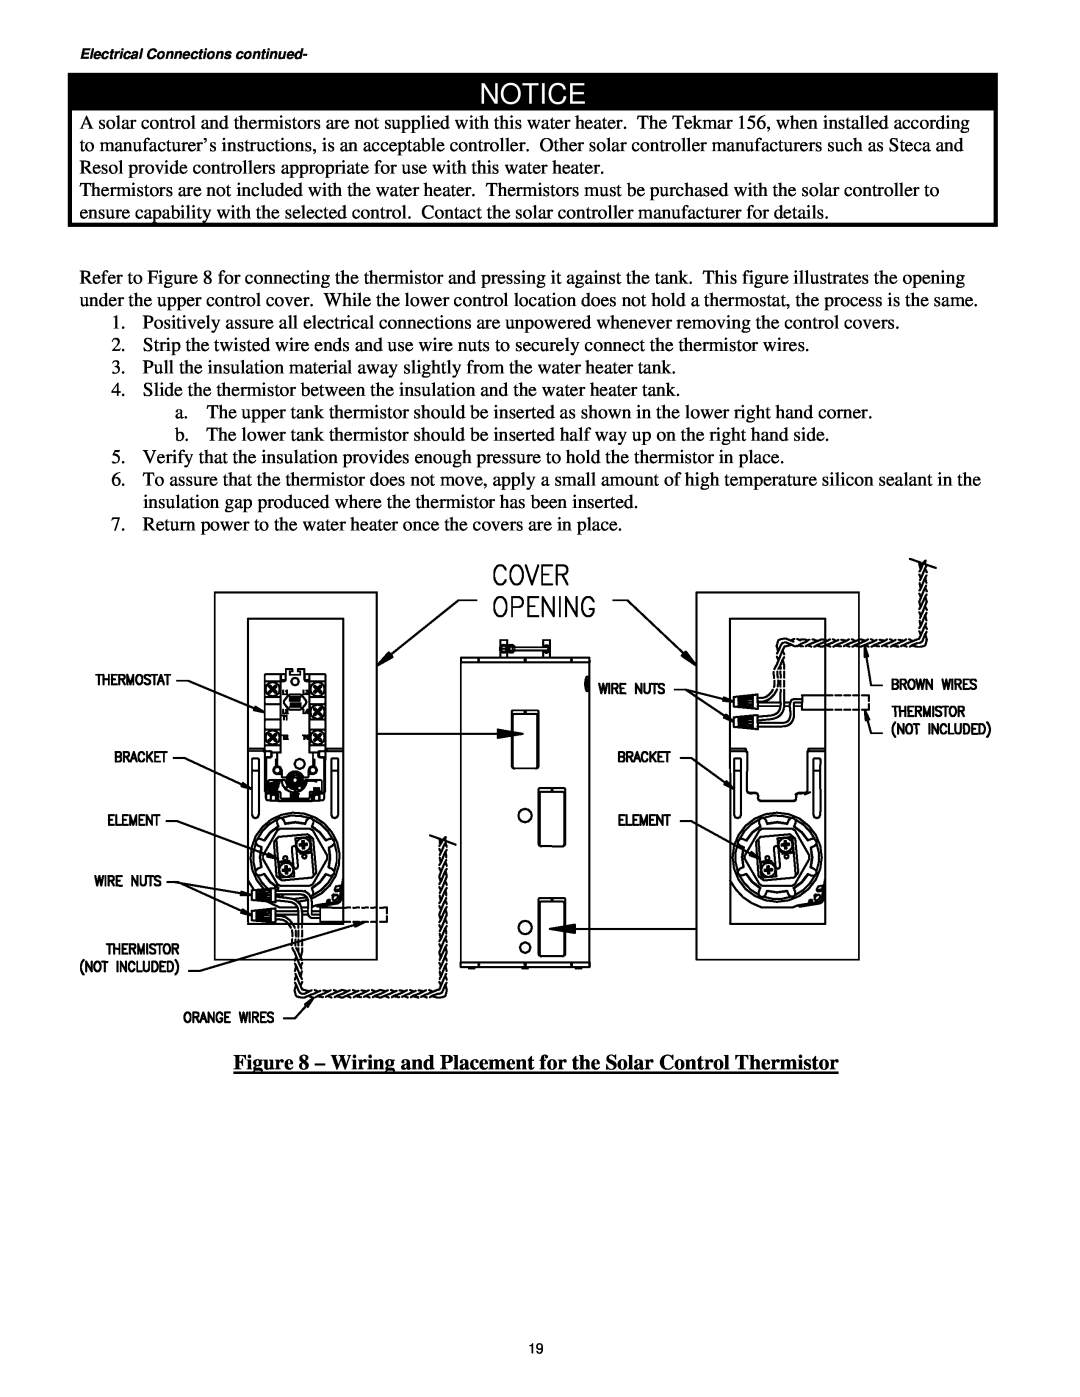 Bradford-White Corp Solar Water Heater manual Wiring and Placement for the Solar Control Thermistor 